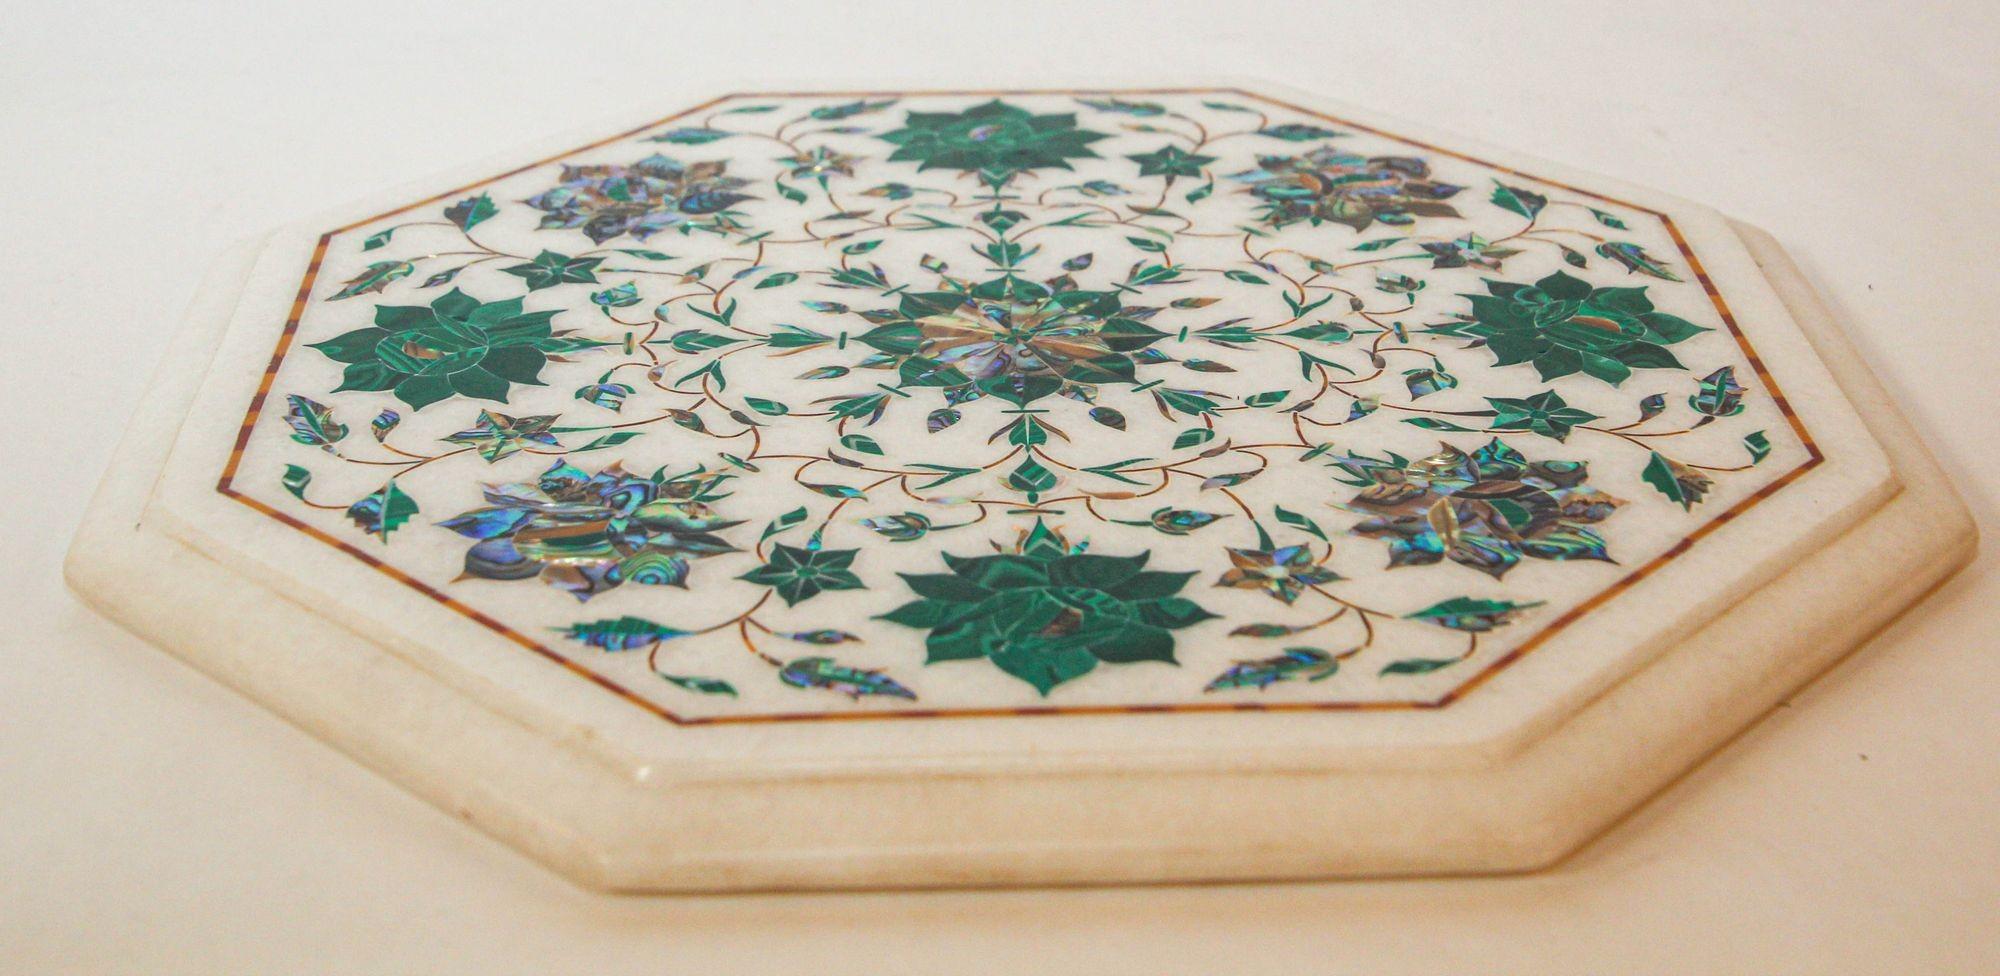 Handmade Pietra Dura Marble Inlay Mosaic Octagonal Top or Tray Agra India.
Mughal style Pietra Dura white Marble Flower Motif Inlaid Marble Tray Rajasthan India.
Classical 1980s Pietra Dura mosaic inlay white marble table top with intricate